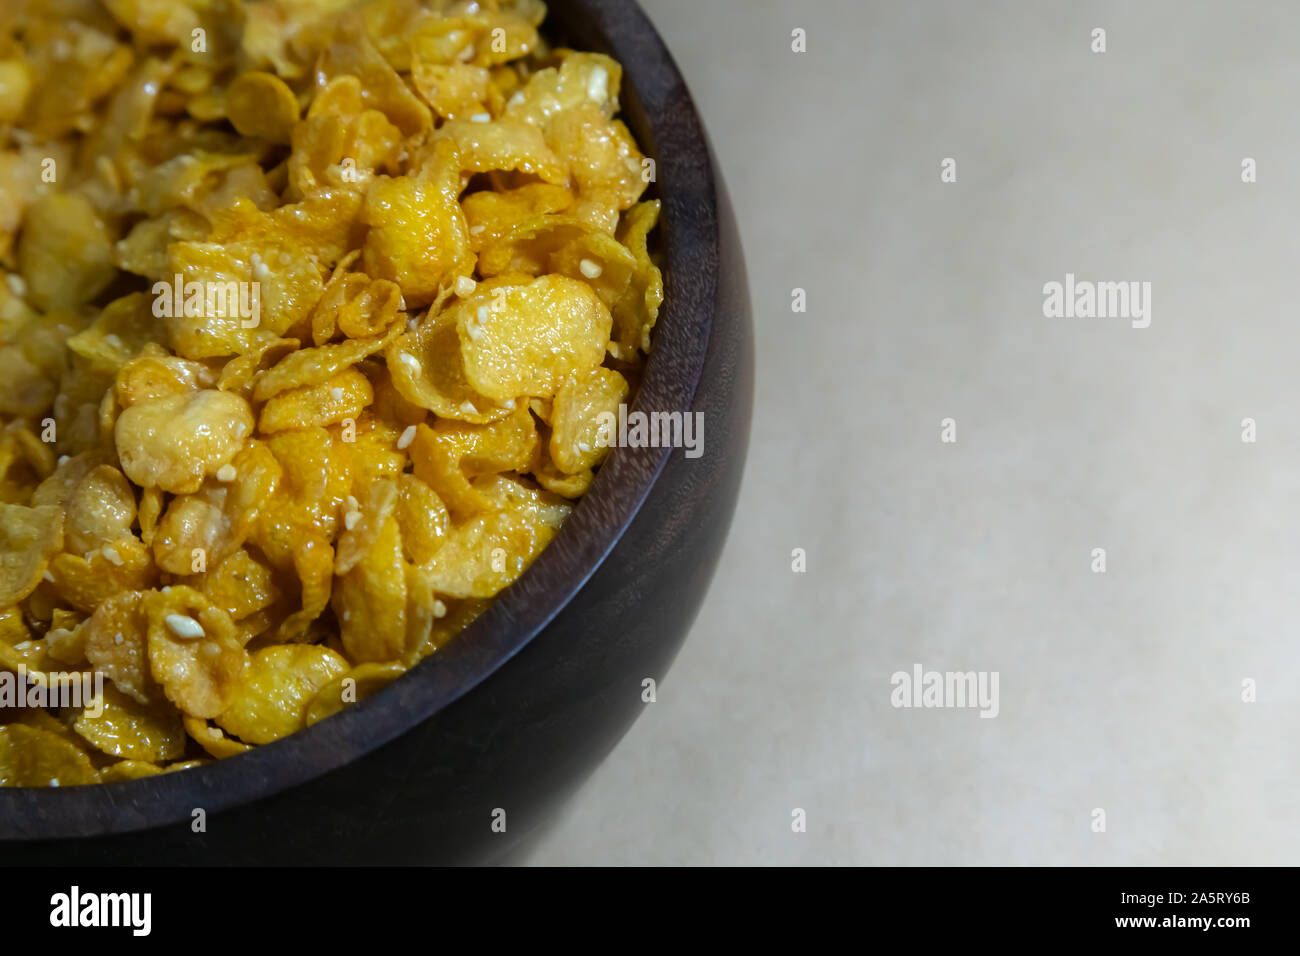 Close up Honey coated puffed wheat breakfast cereal on gray baclground. Stock Photo